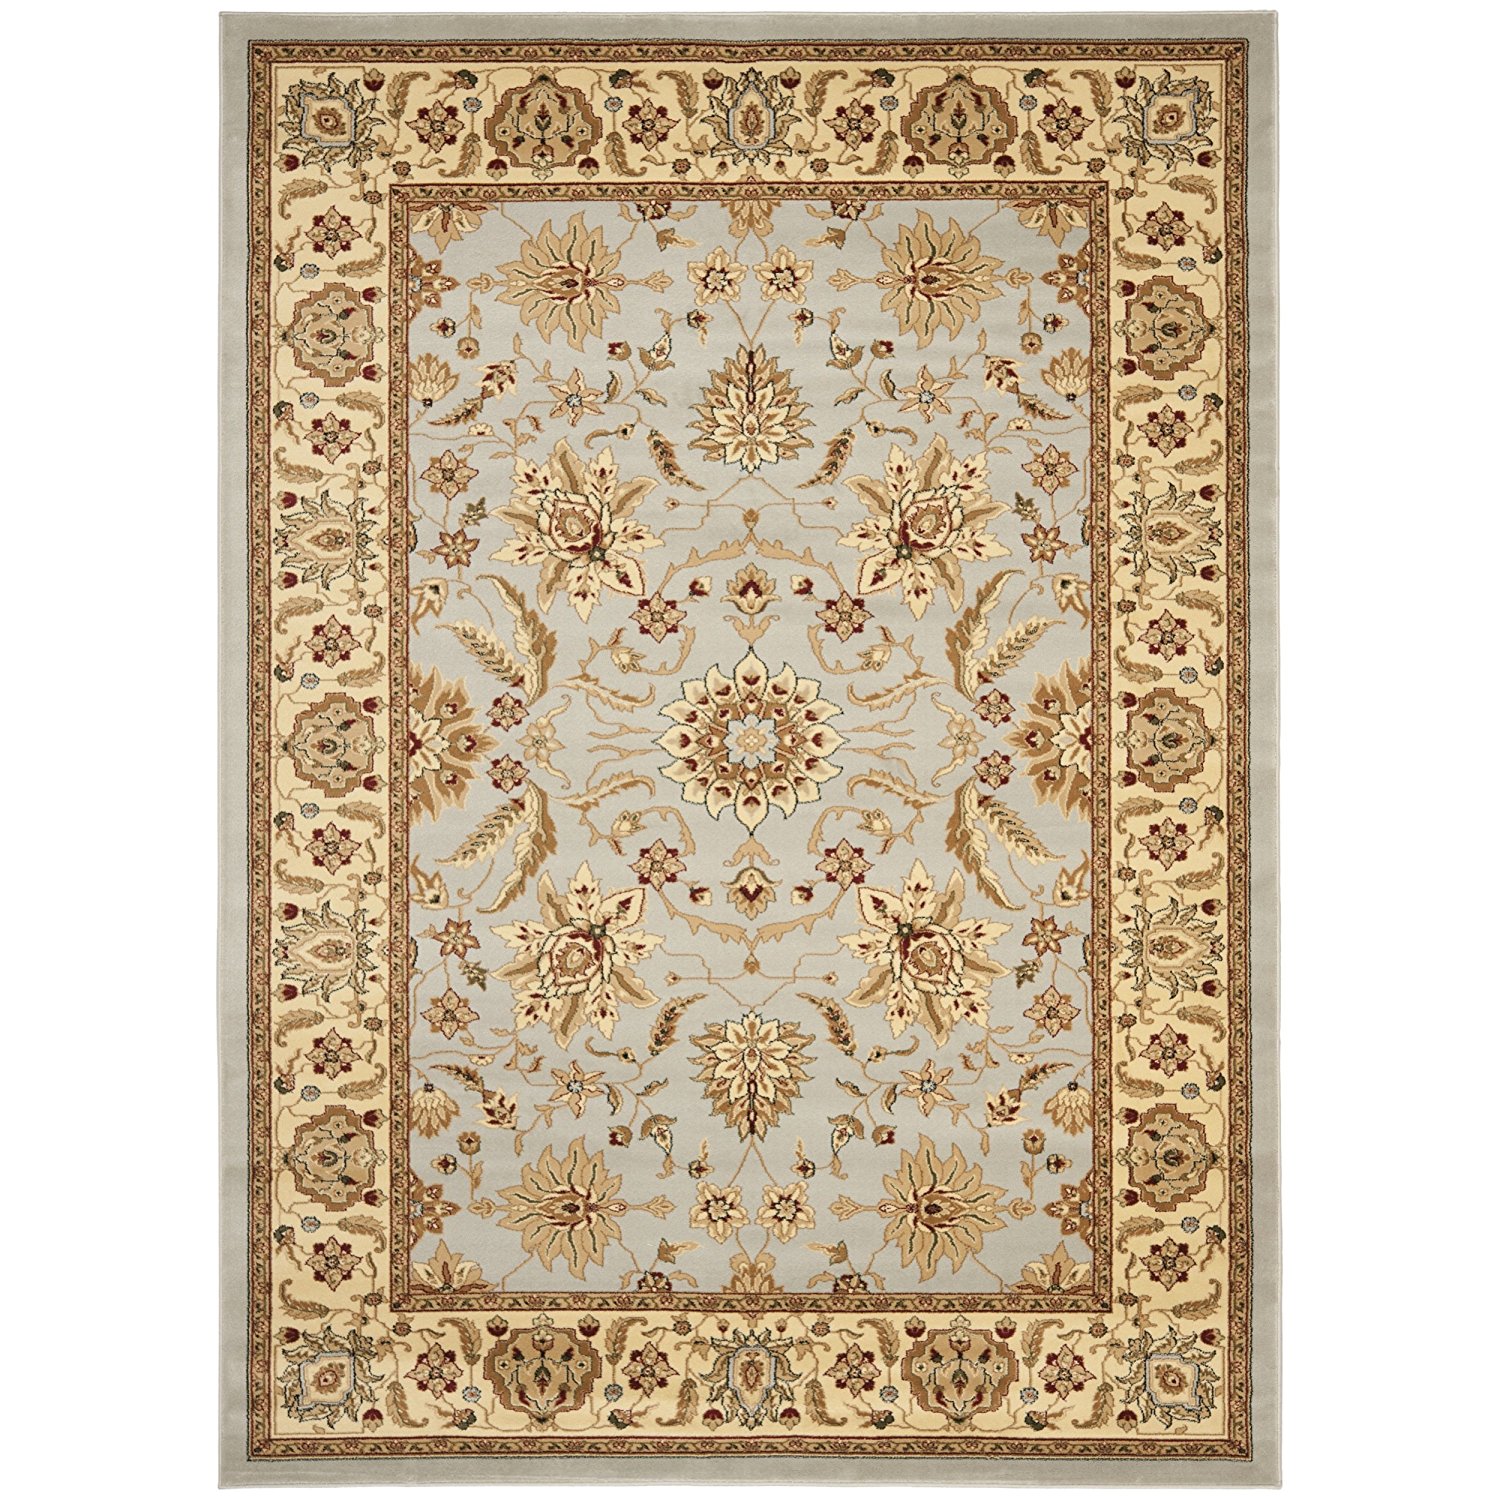 Safavieh Lyndhurst Collection LNH216G Traditional Oriental Grey and Beige Rectangle Area Rug (8'11" x 12')